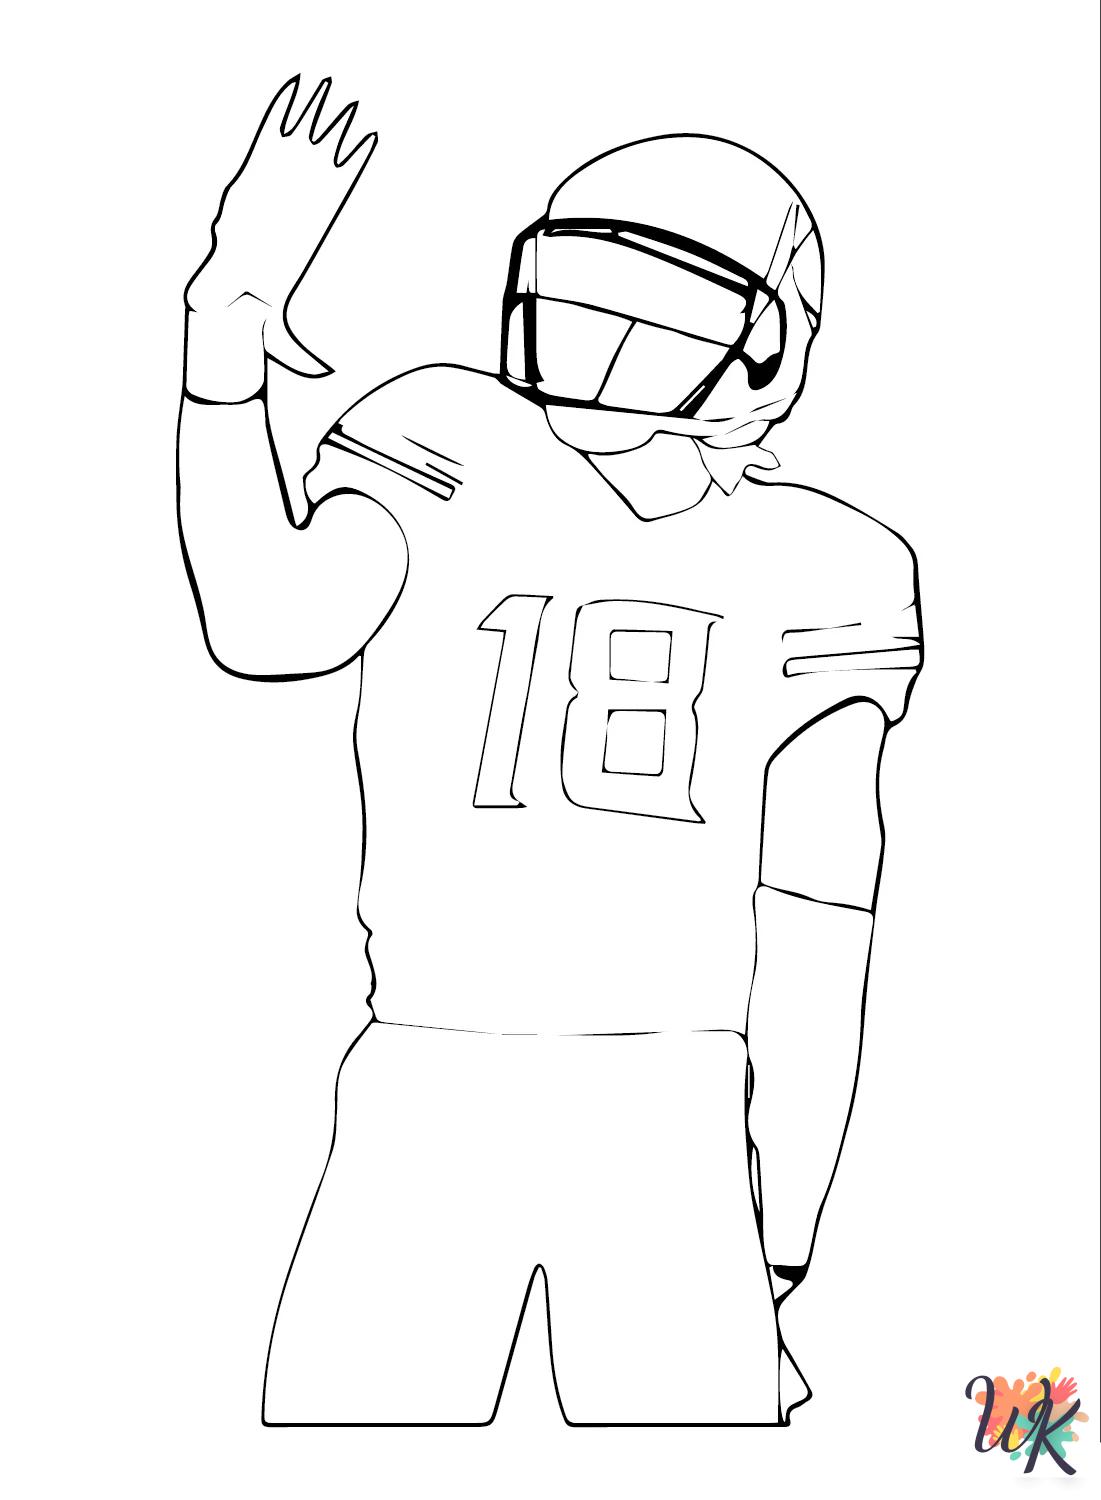 Justin Jefferson themed coloring pages